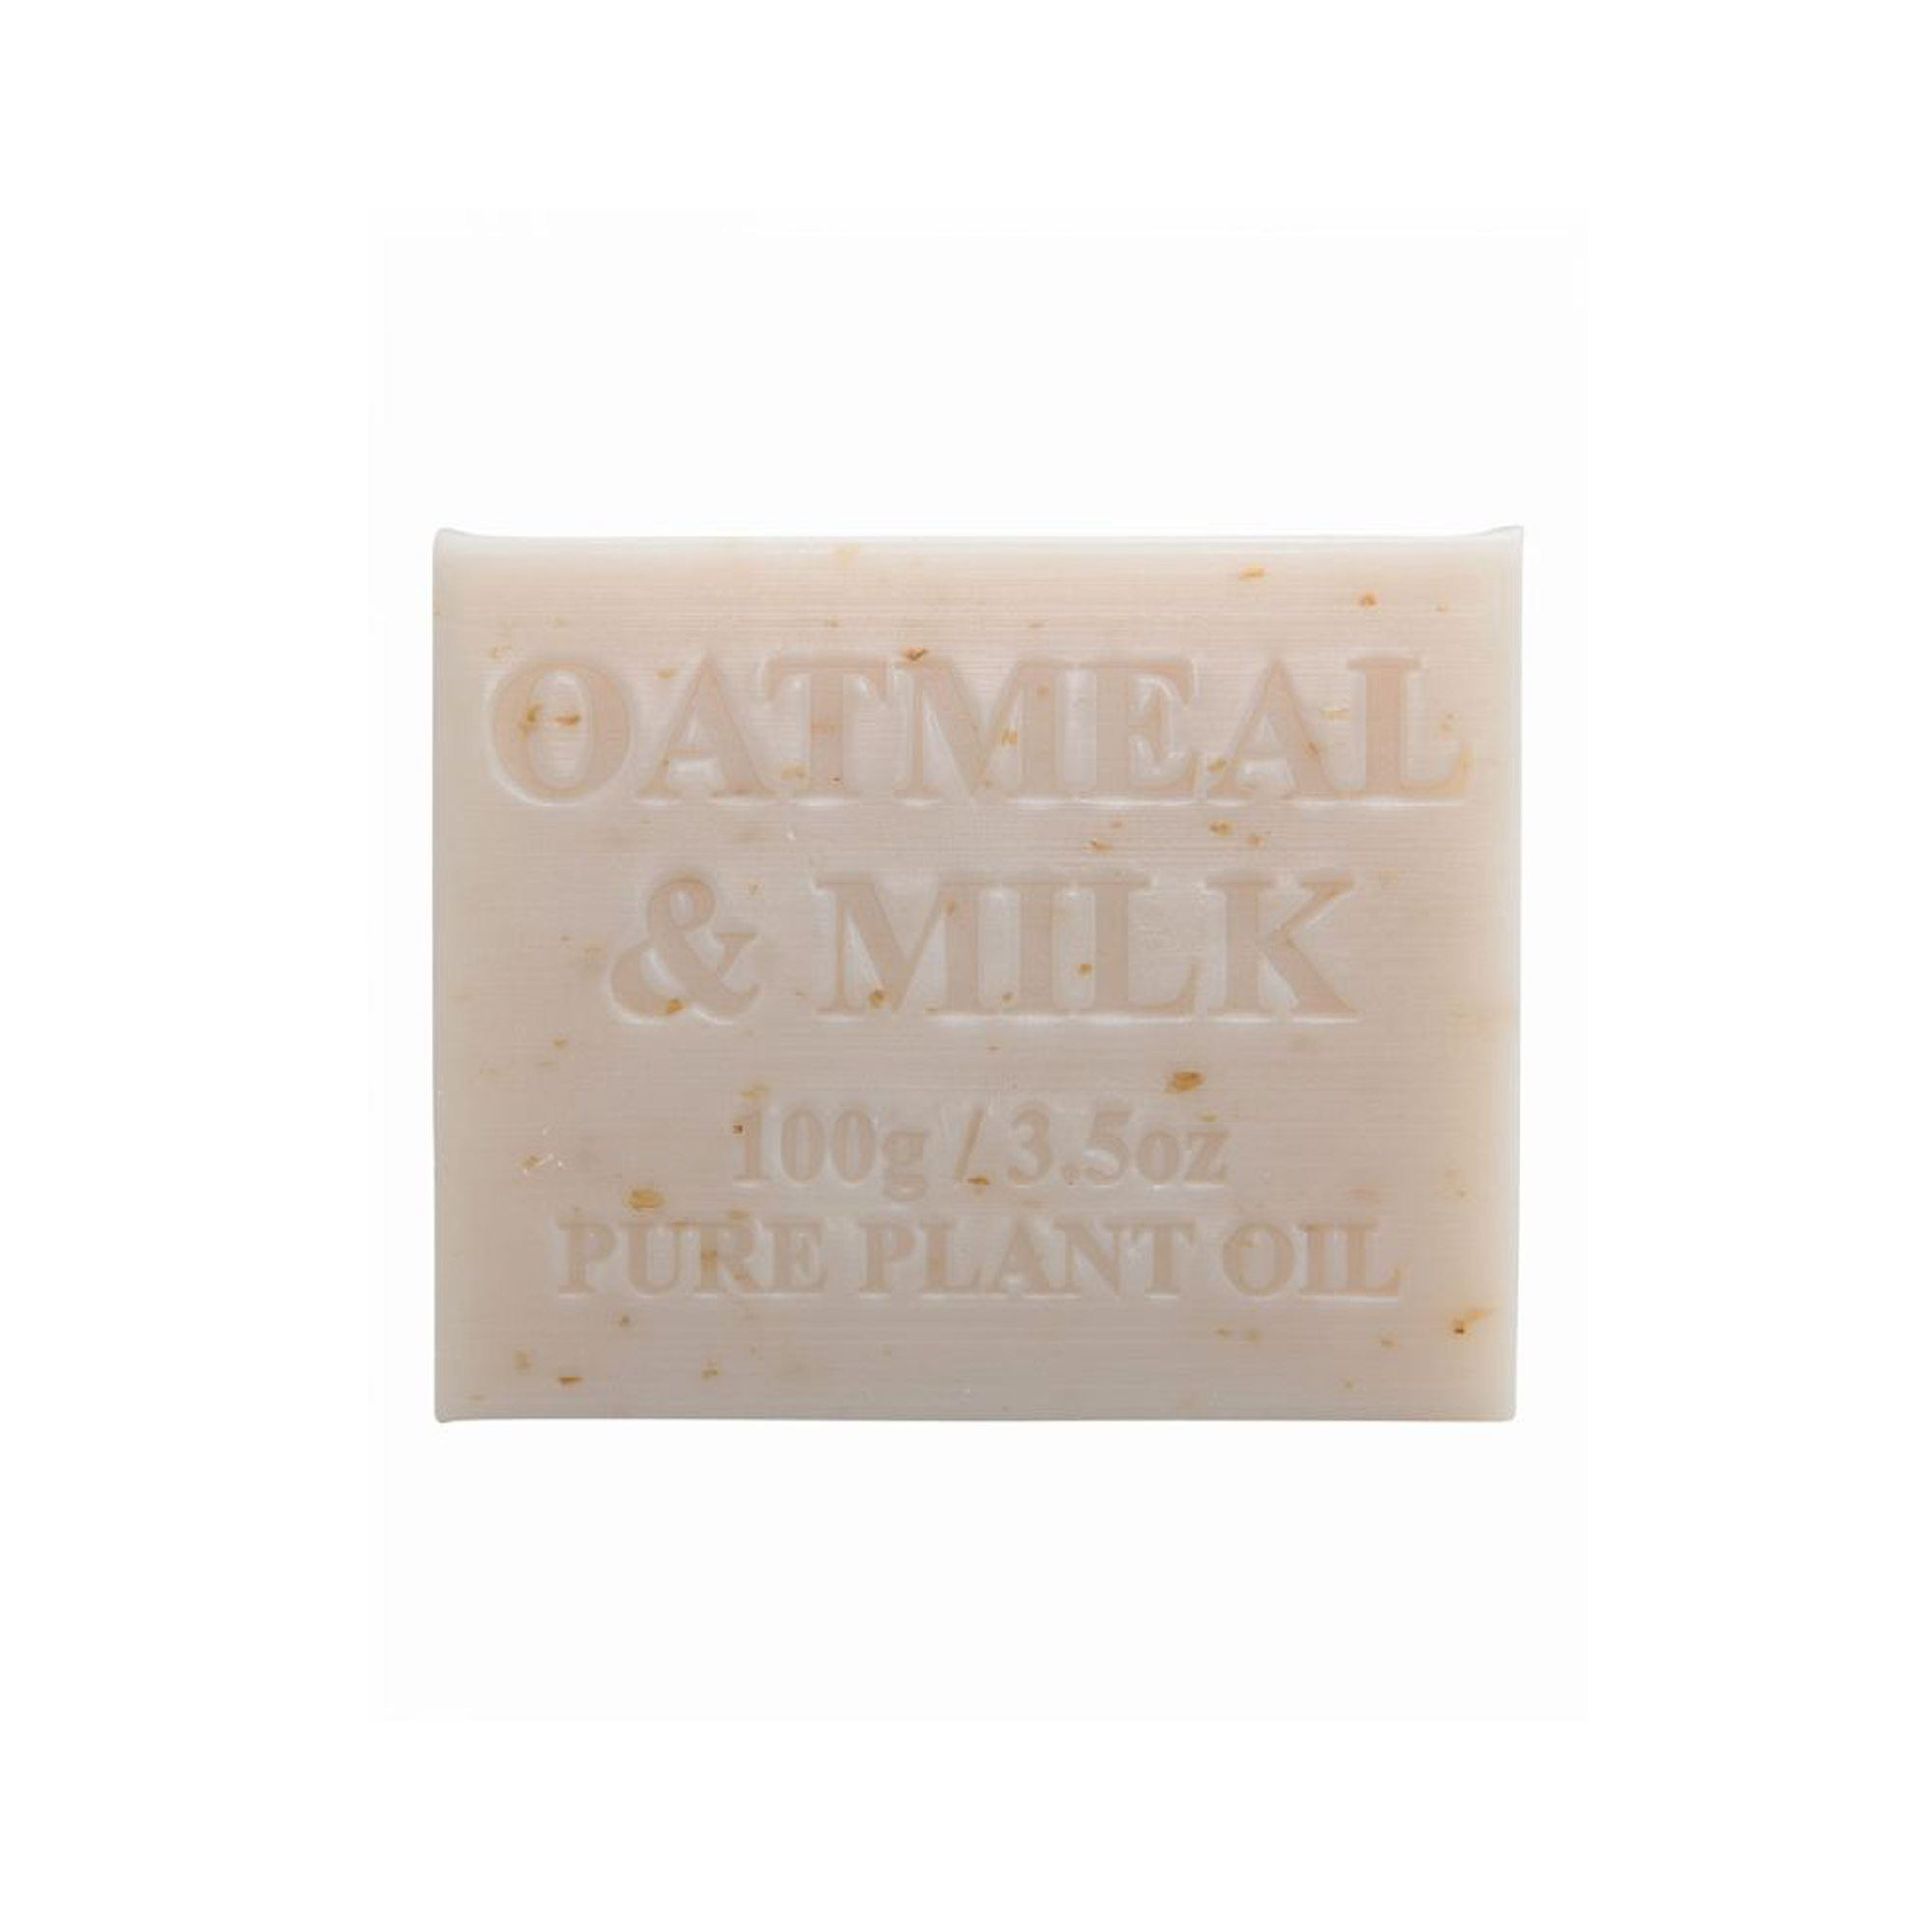 100g Oatmeal and Milk Soap x100